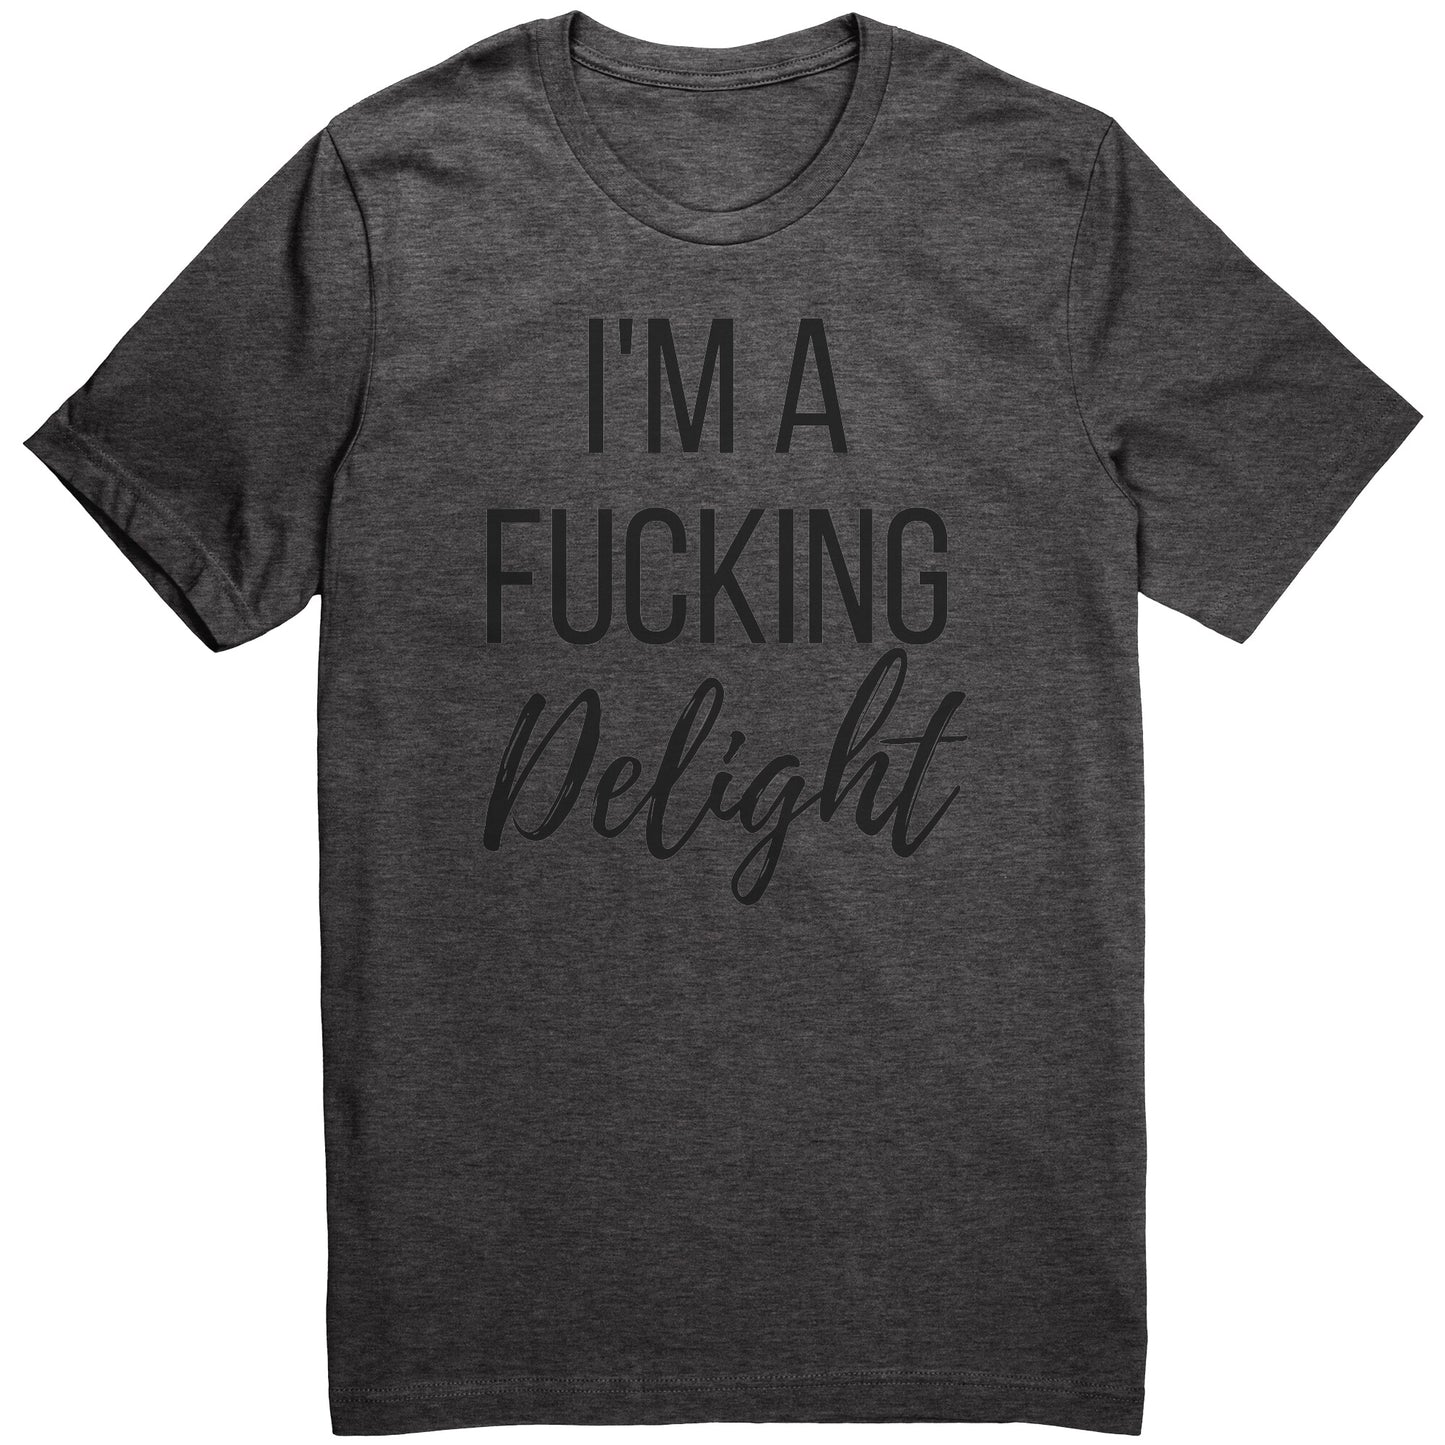 I'm A Delight Tee